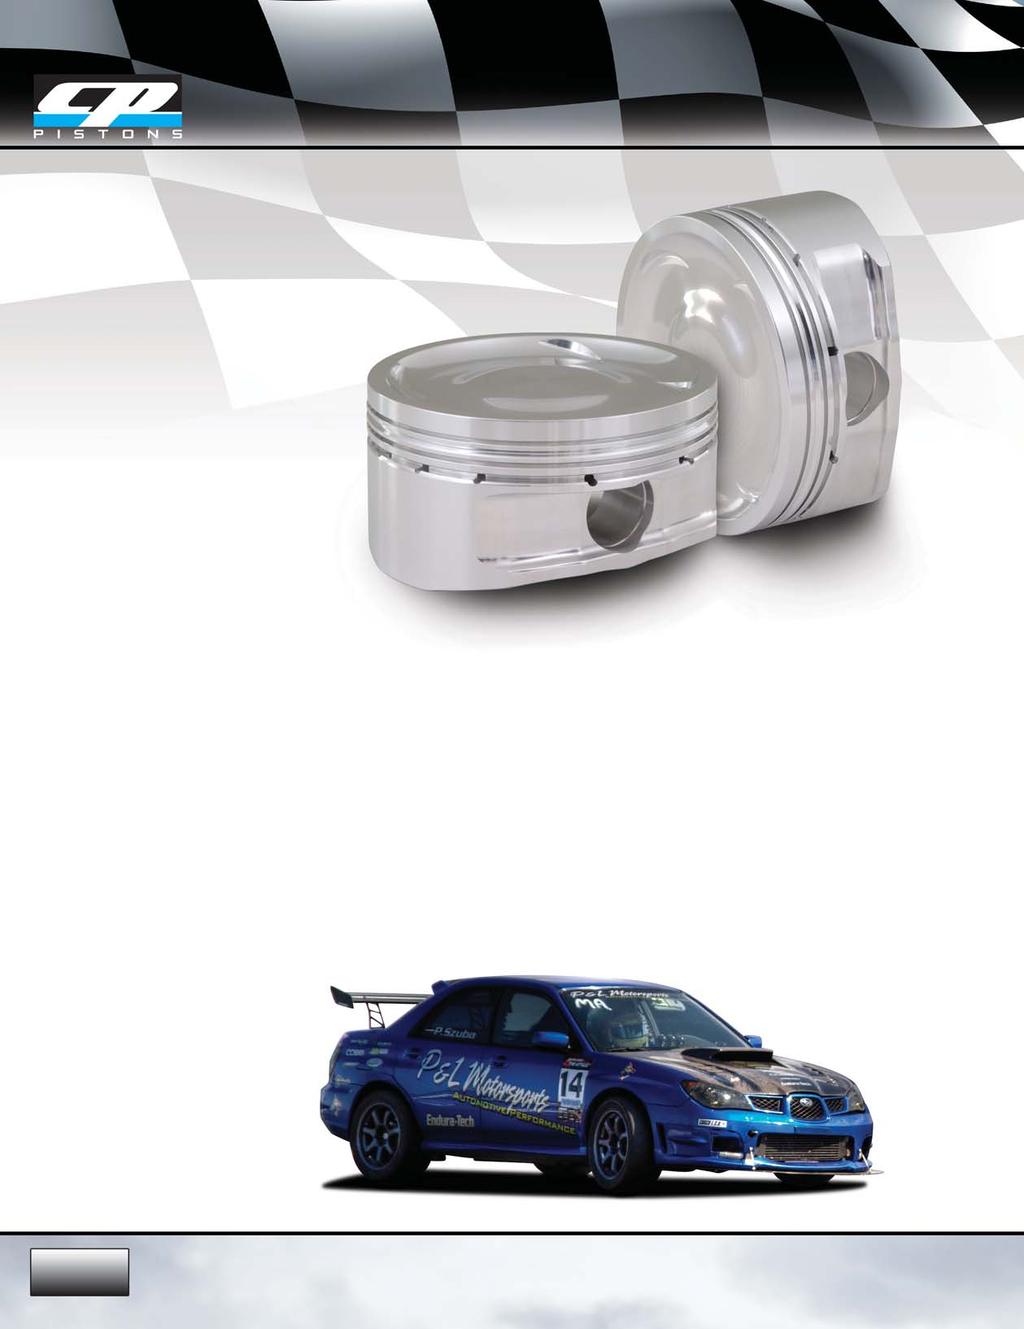 SUBARU SUBARU PISTONS CP Subaru pistons are available standard or oversized. CP pistons are compatible with oversize valves, higher lift cams and high performance rings.